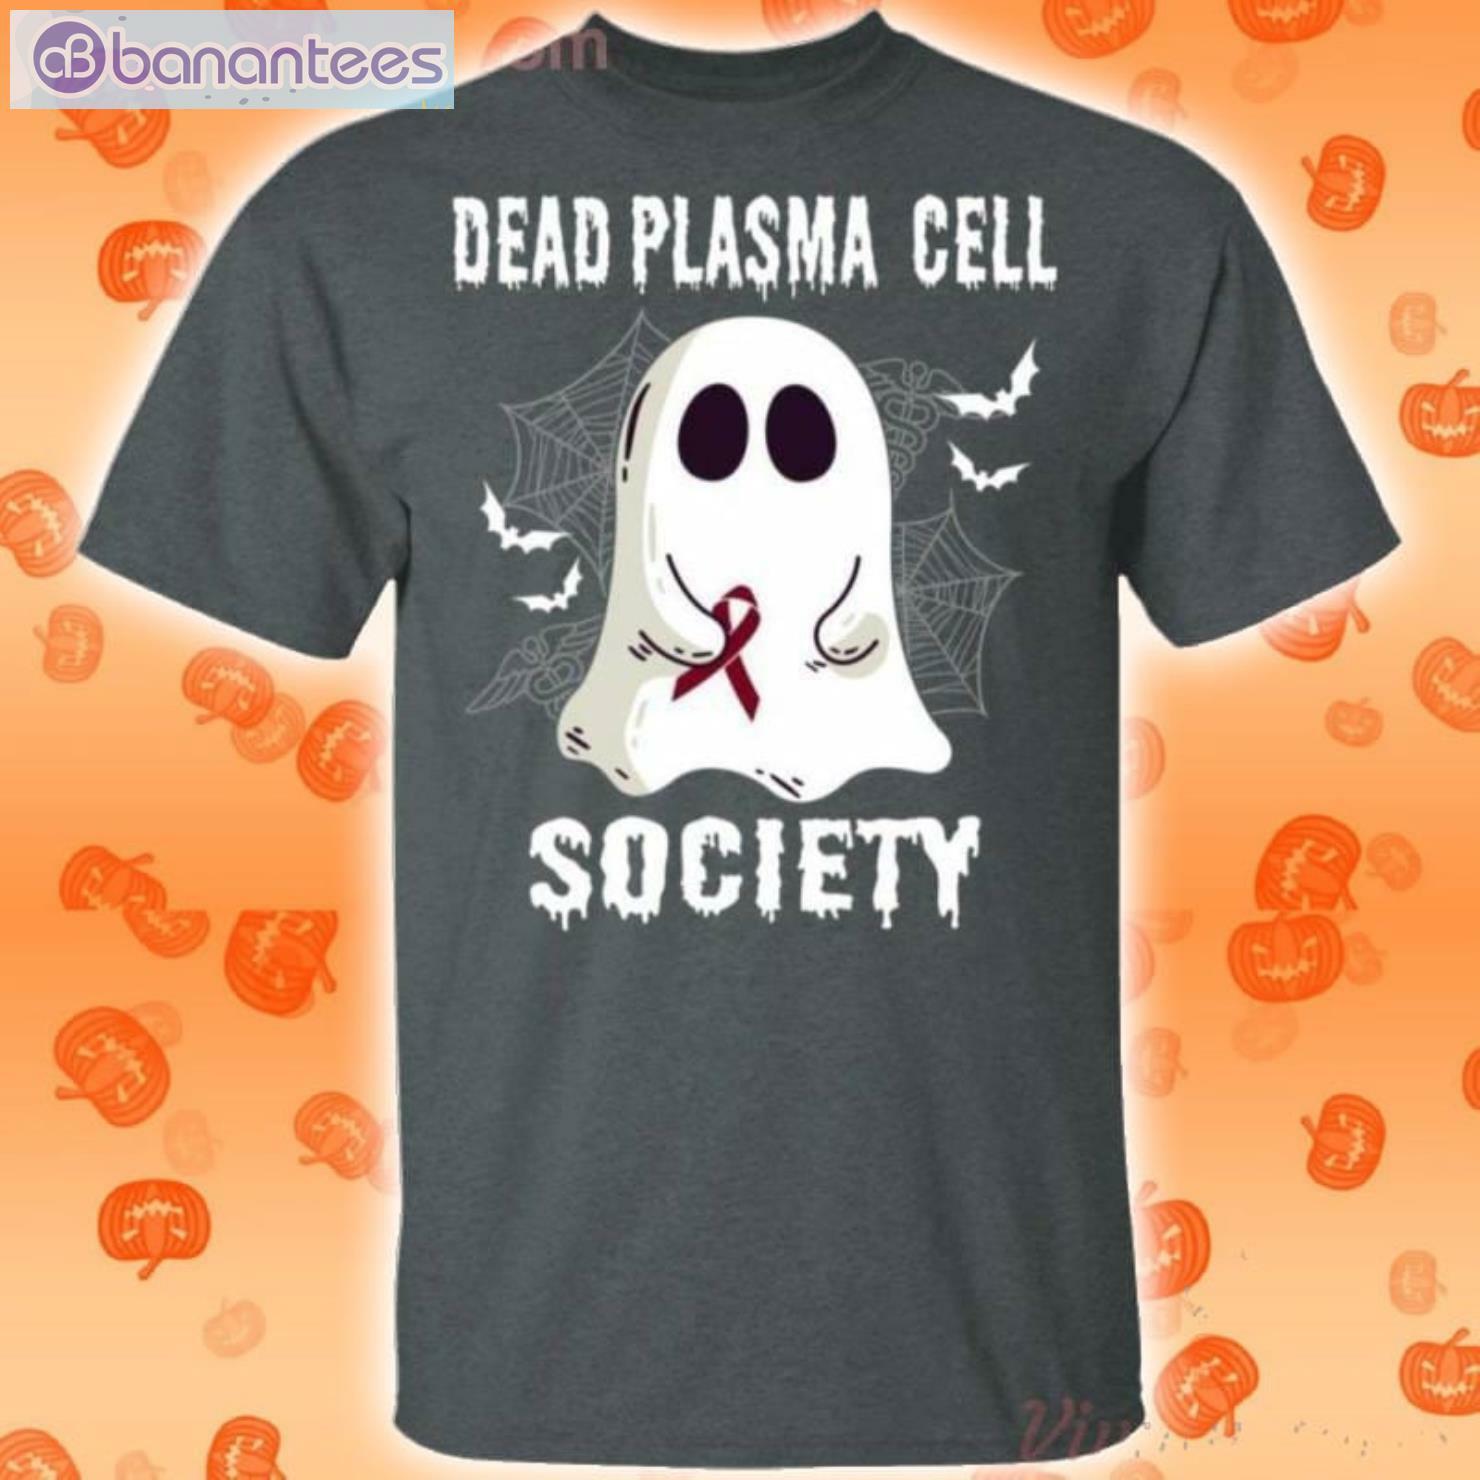 Dead Plasma Cell Society Boo Ghost Halloween Funny T-Shirt Product Photo 2 Product photo 2